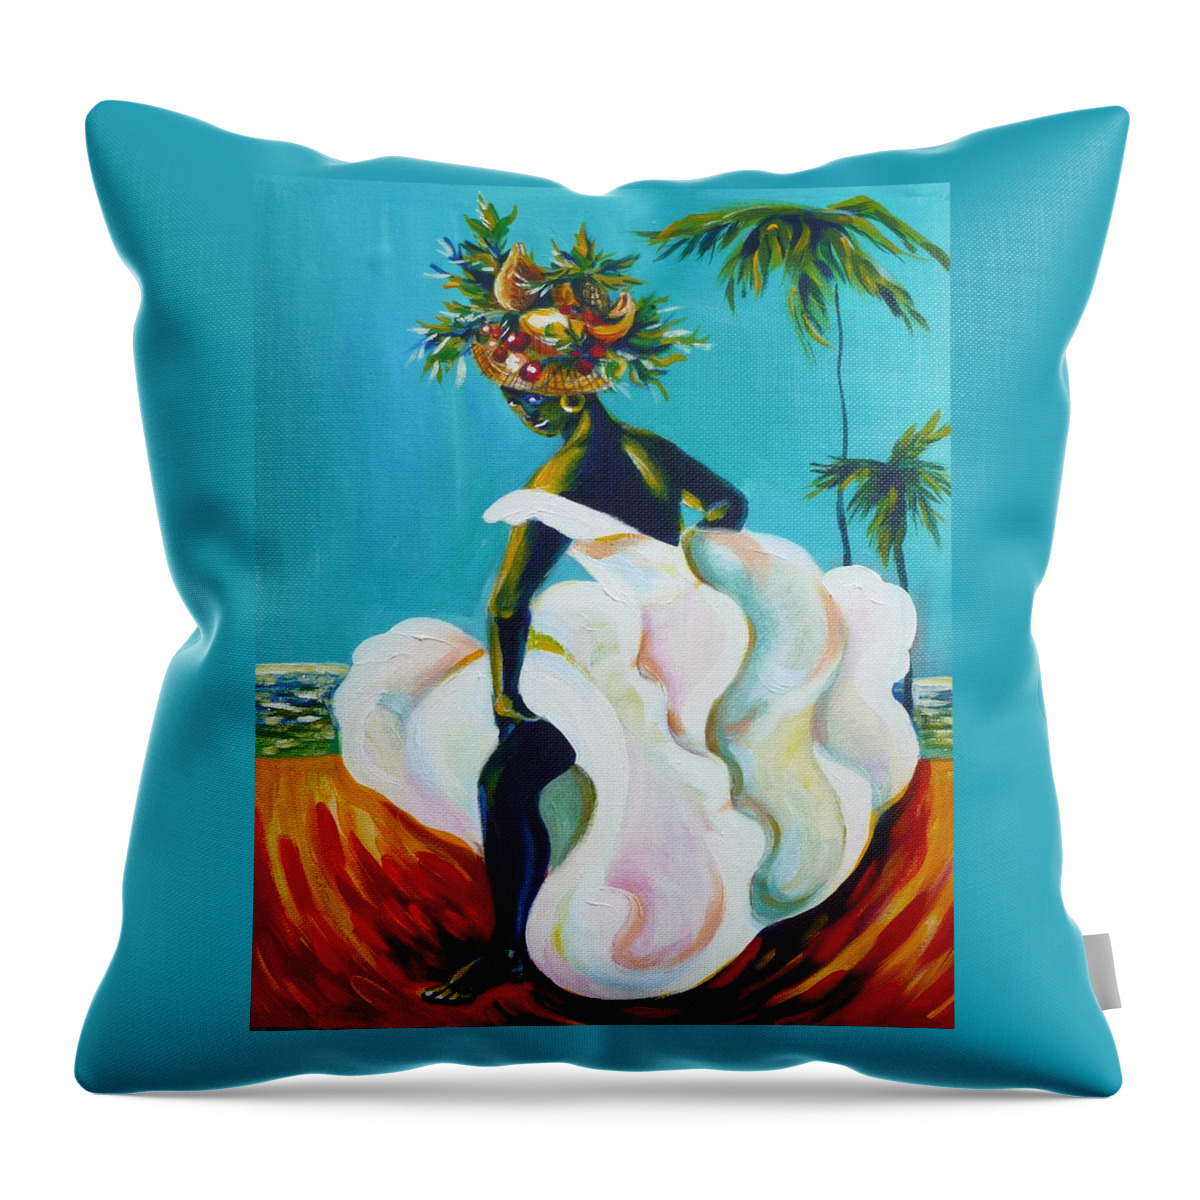 Travel Throw Pillow featuring the painting Tropicana by Anna Duyunova